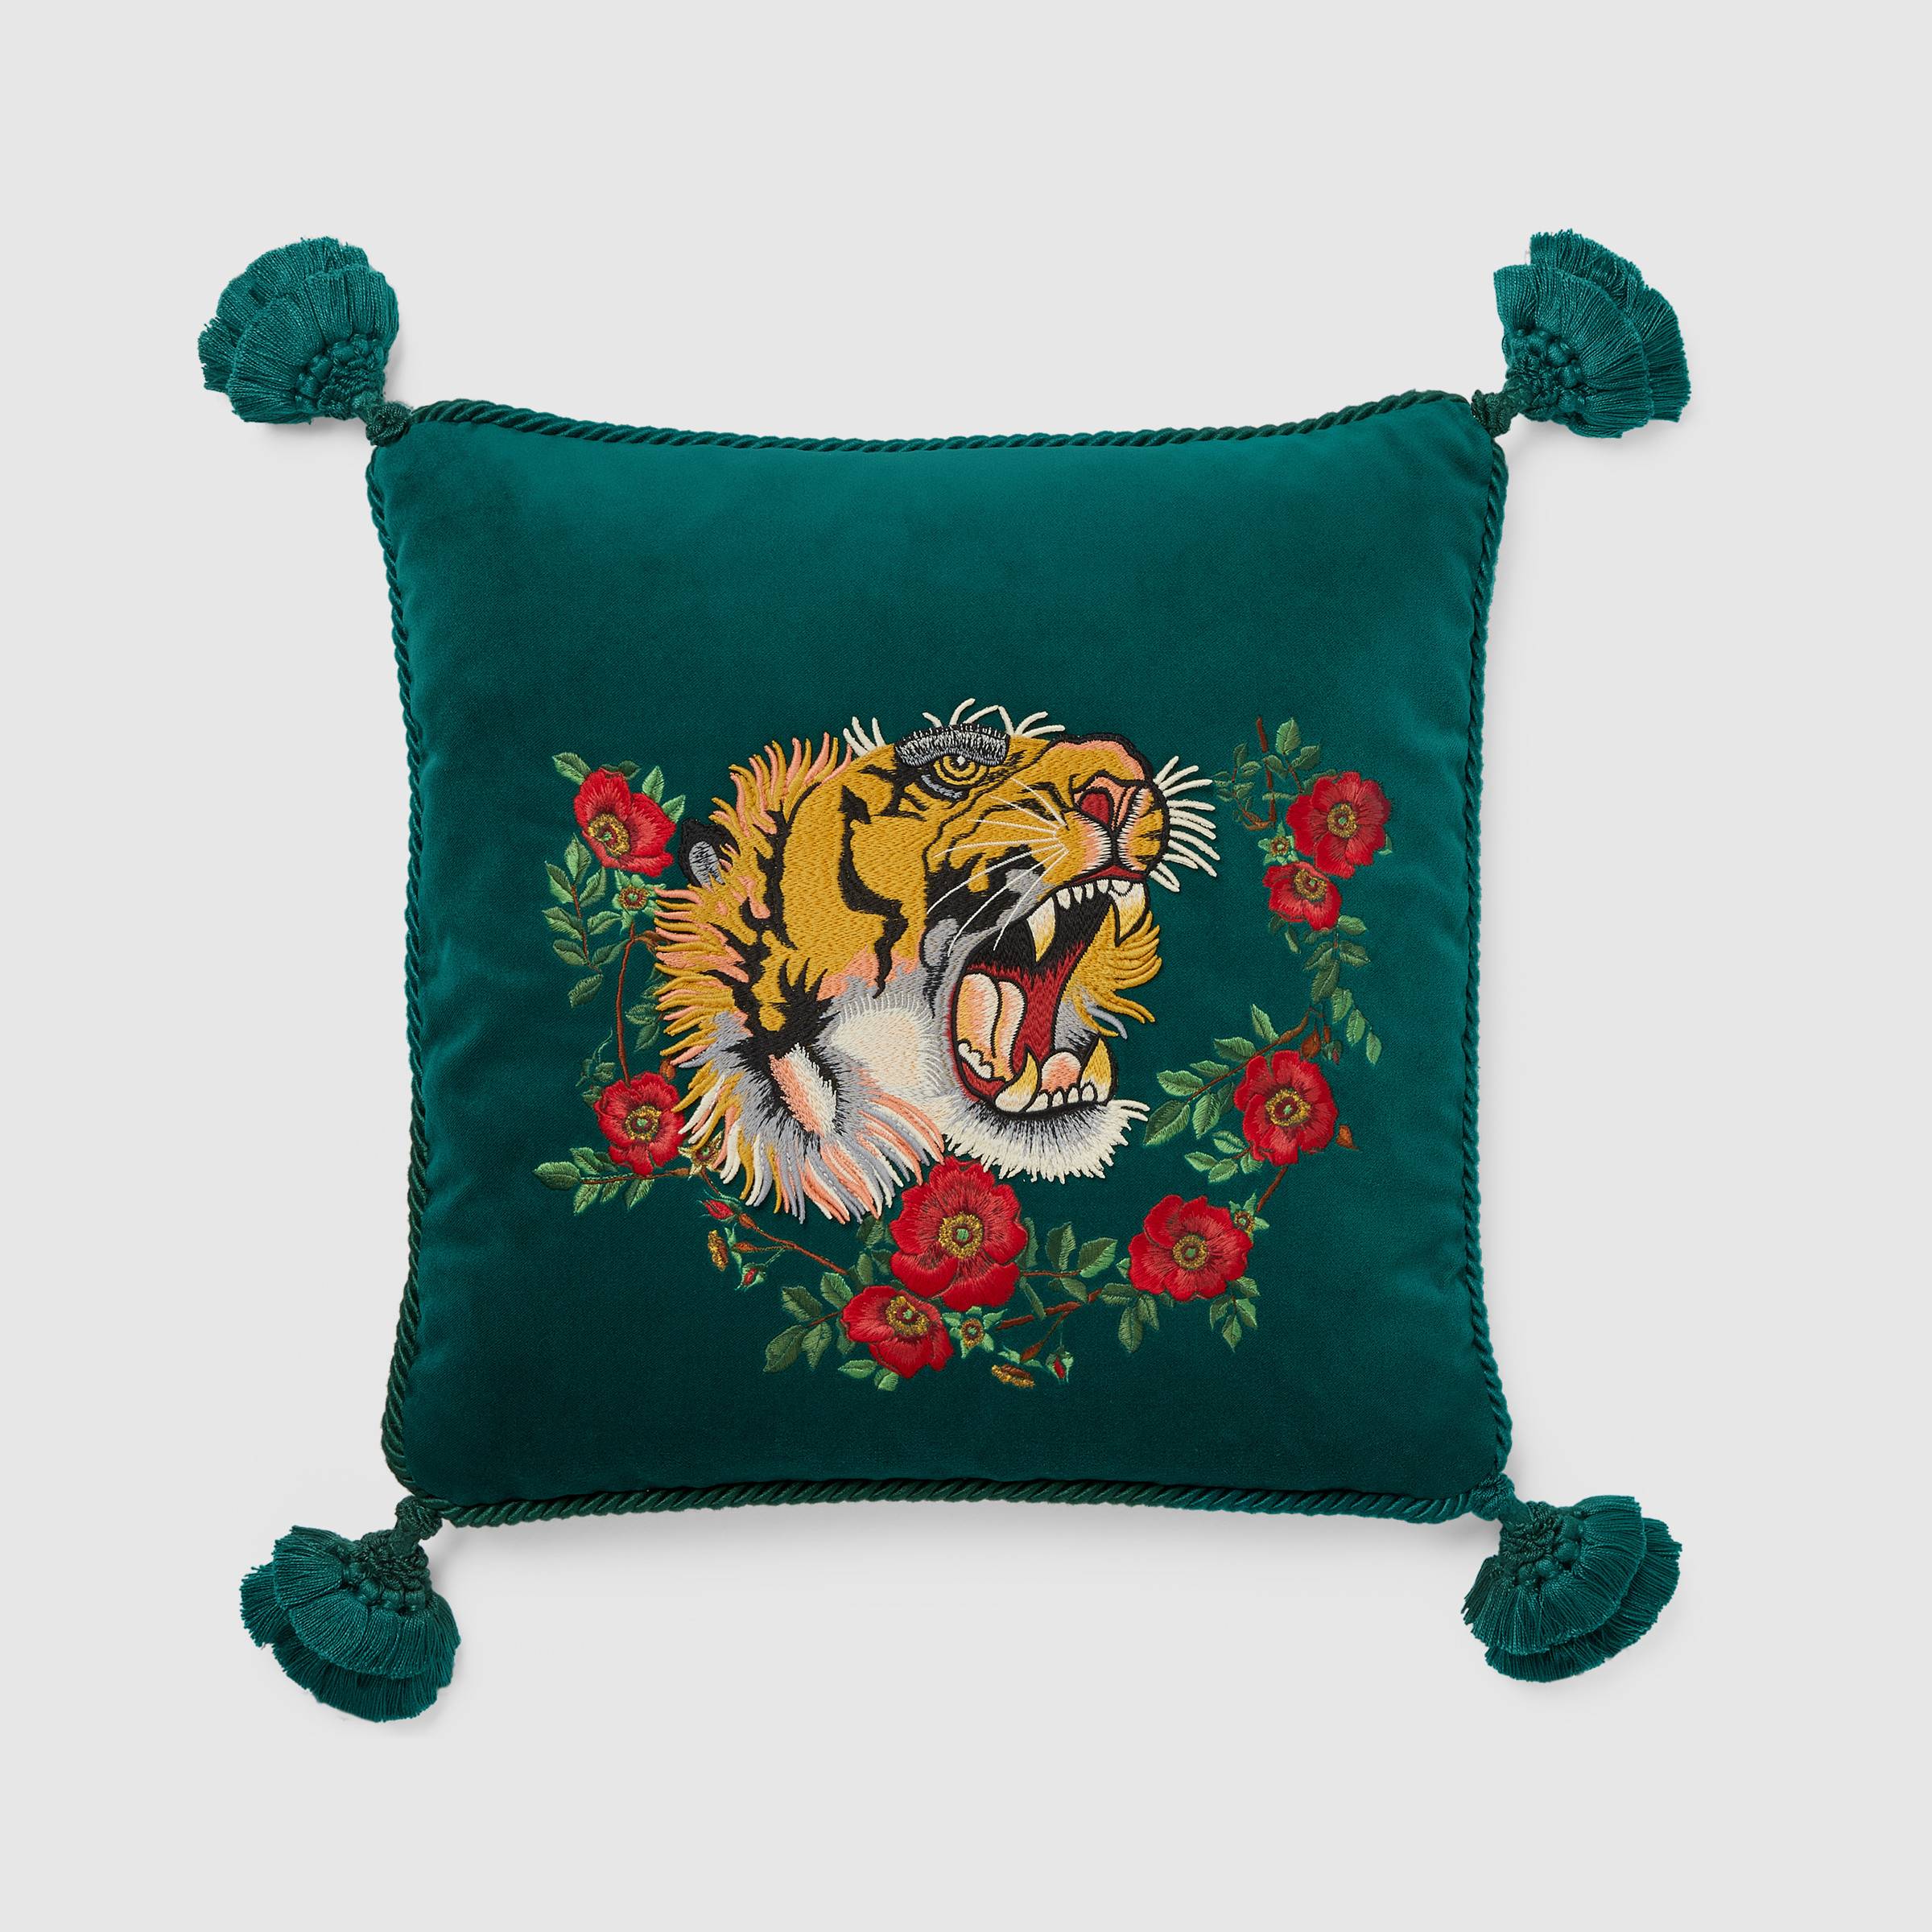 Velvet cushion with tiger embroidery from Gucci Decor